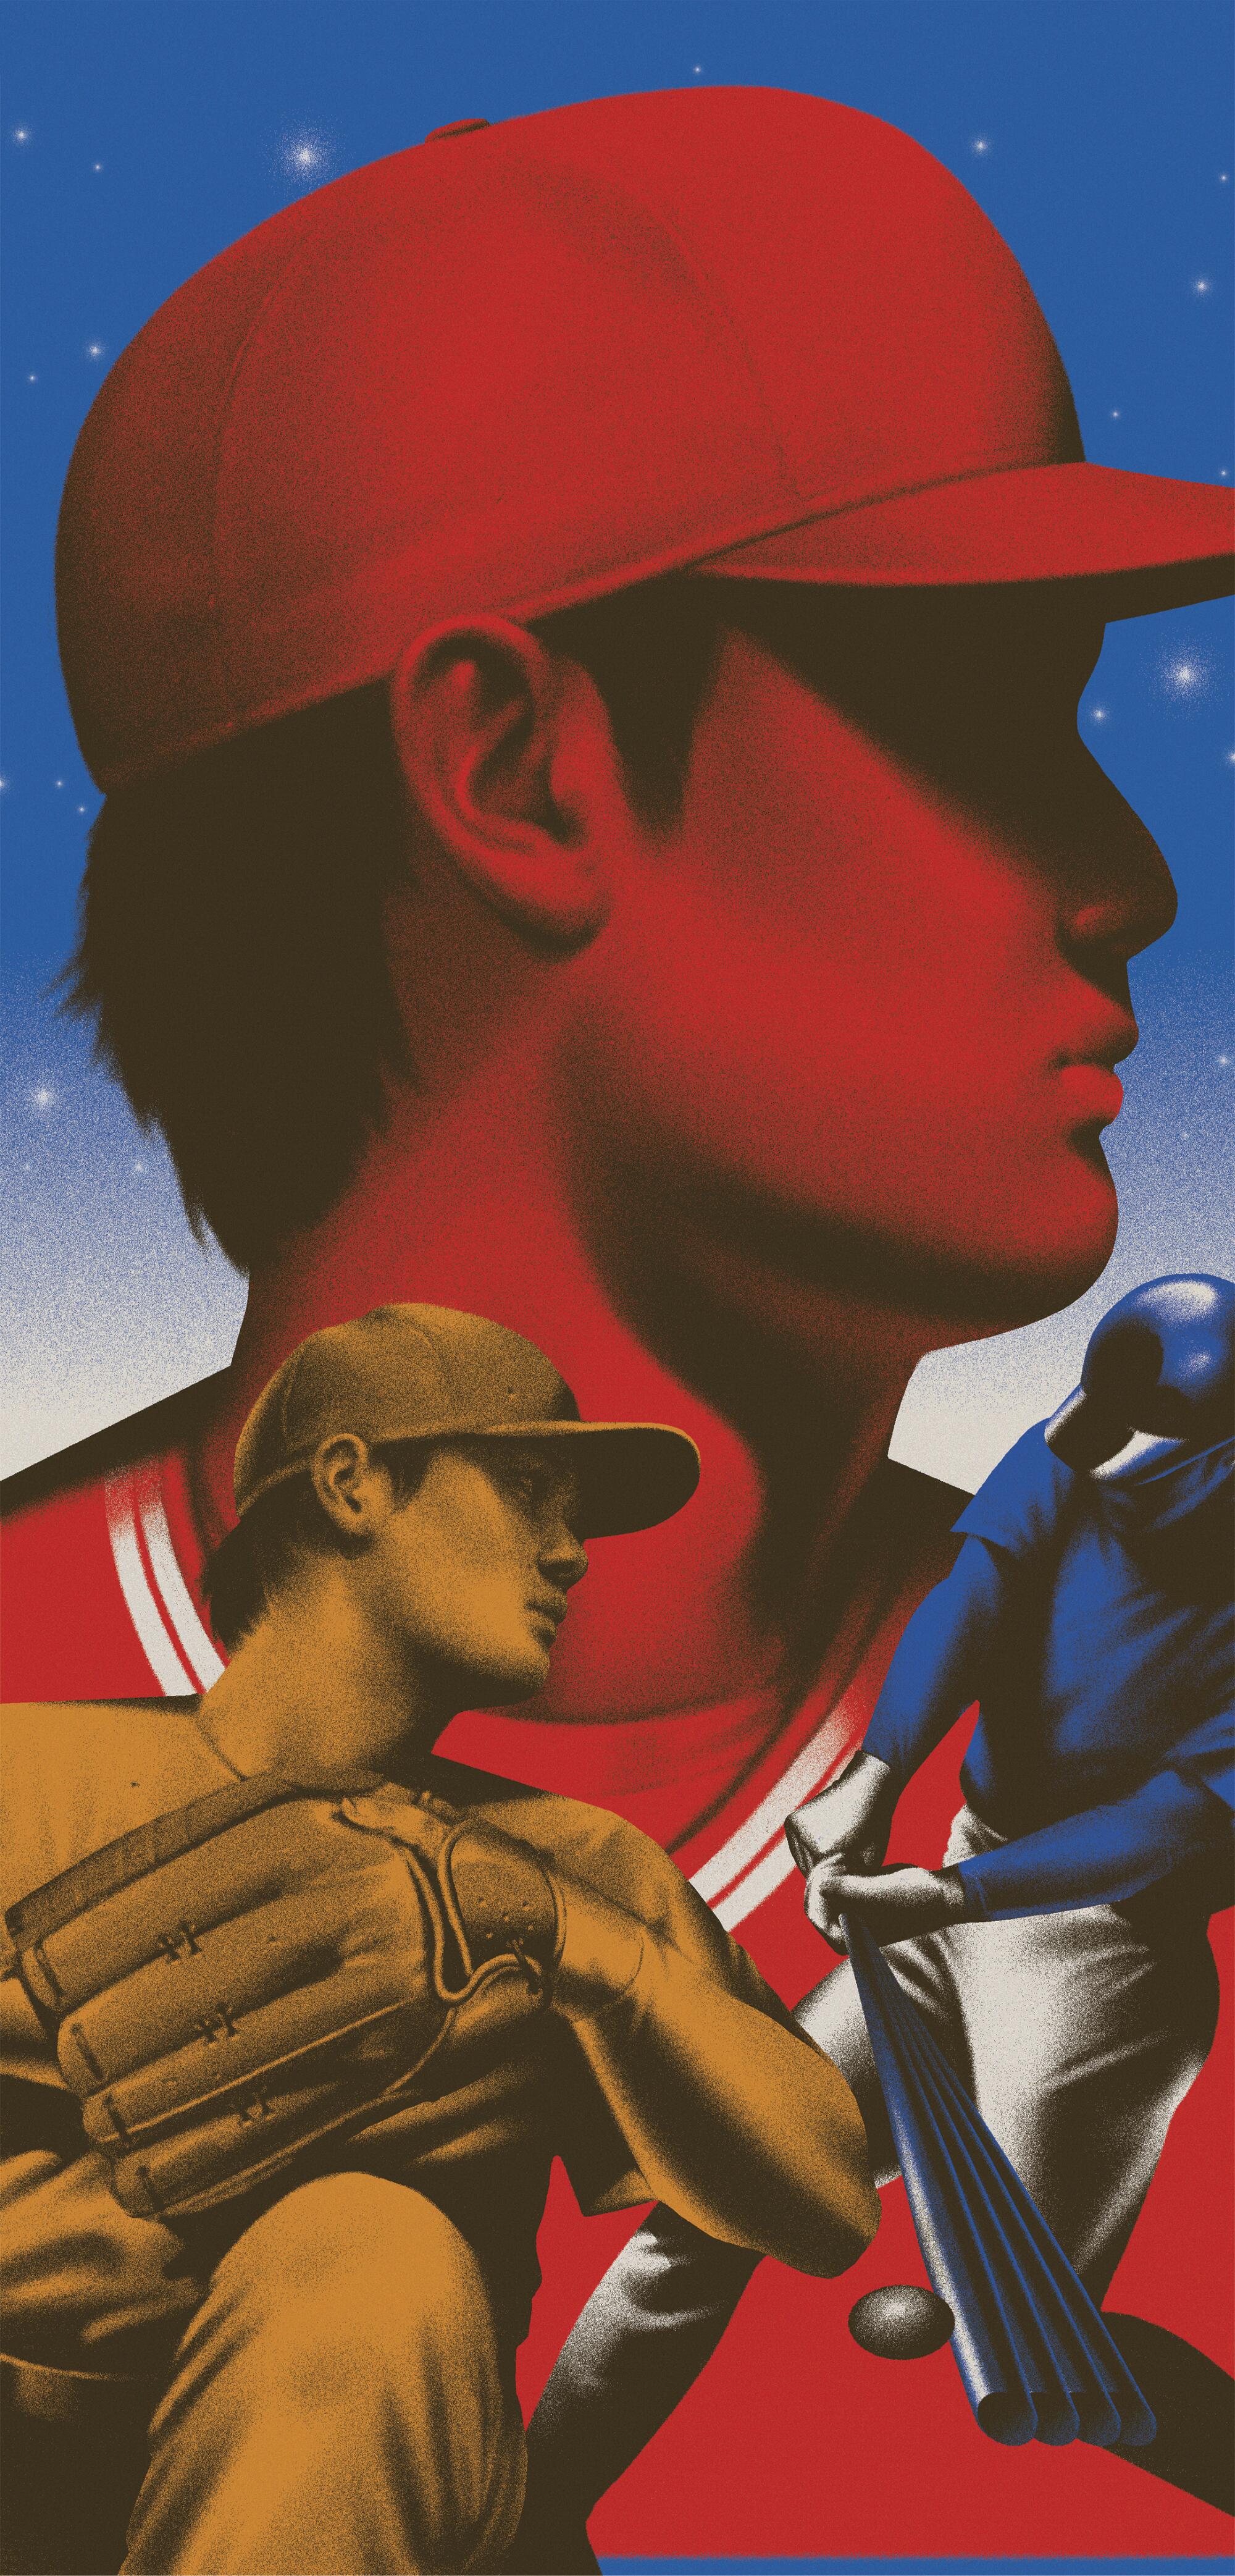 Illustration of three Shohei Ohtanis; one in side profile, one of him hitting a ball and one of him pitching.